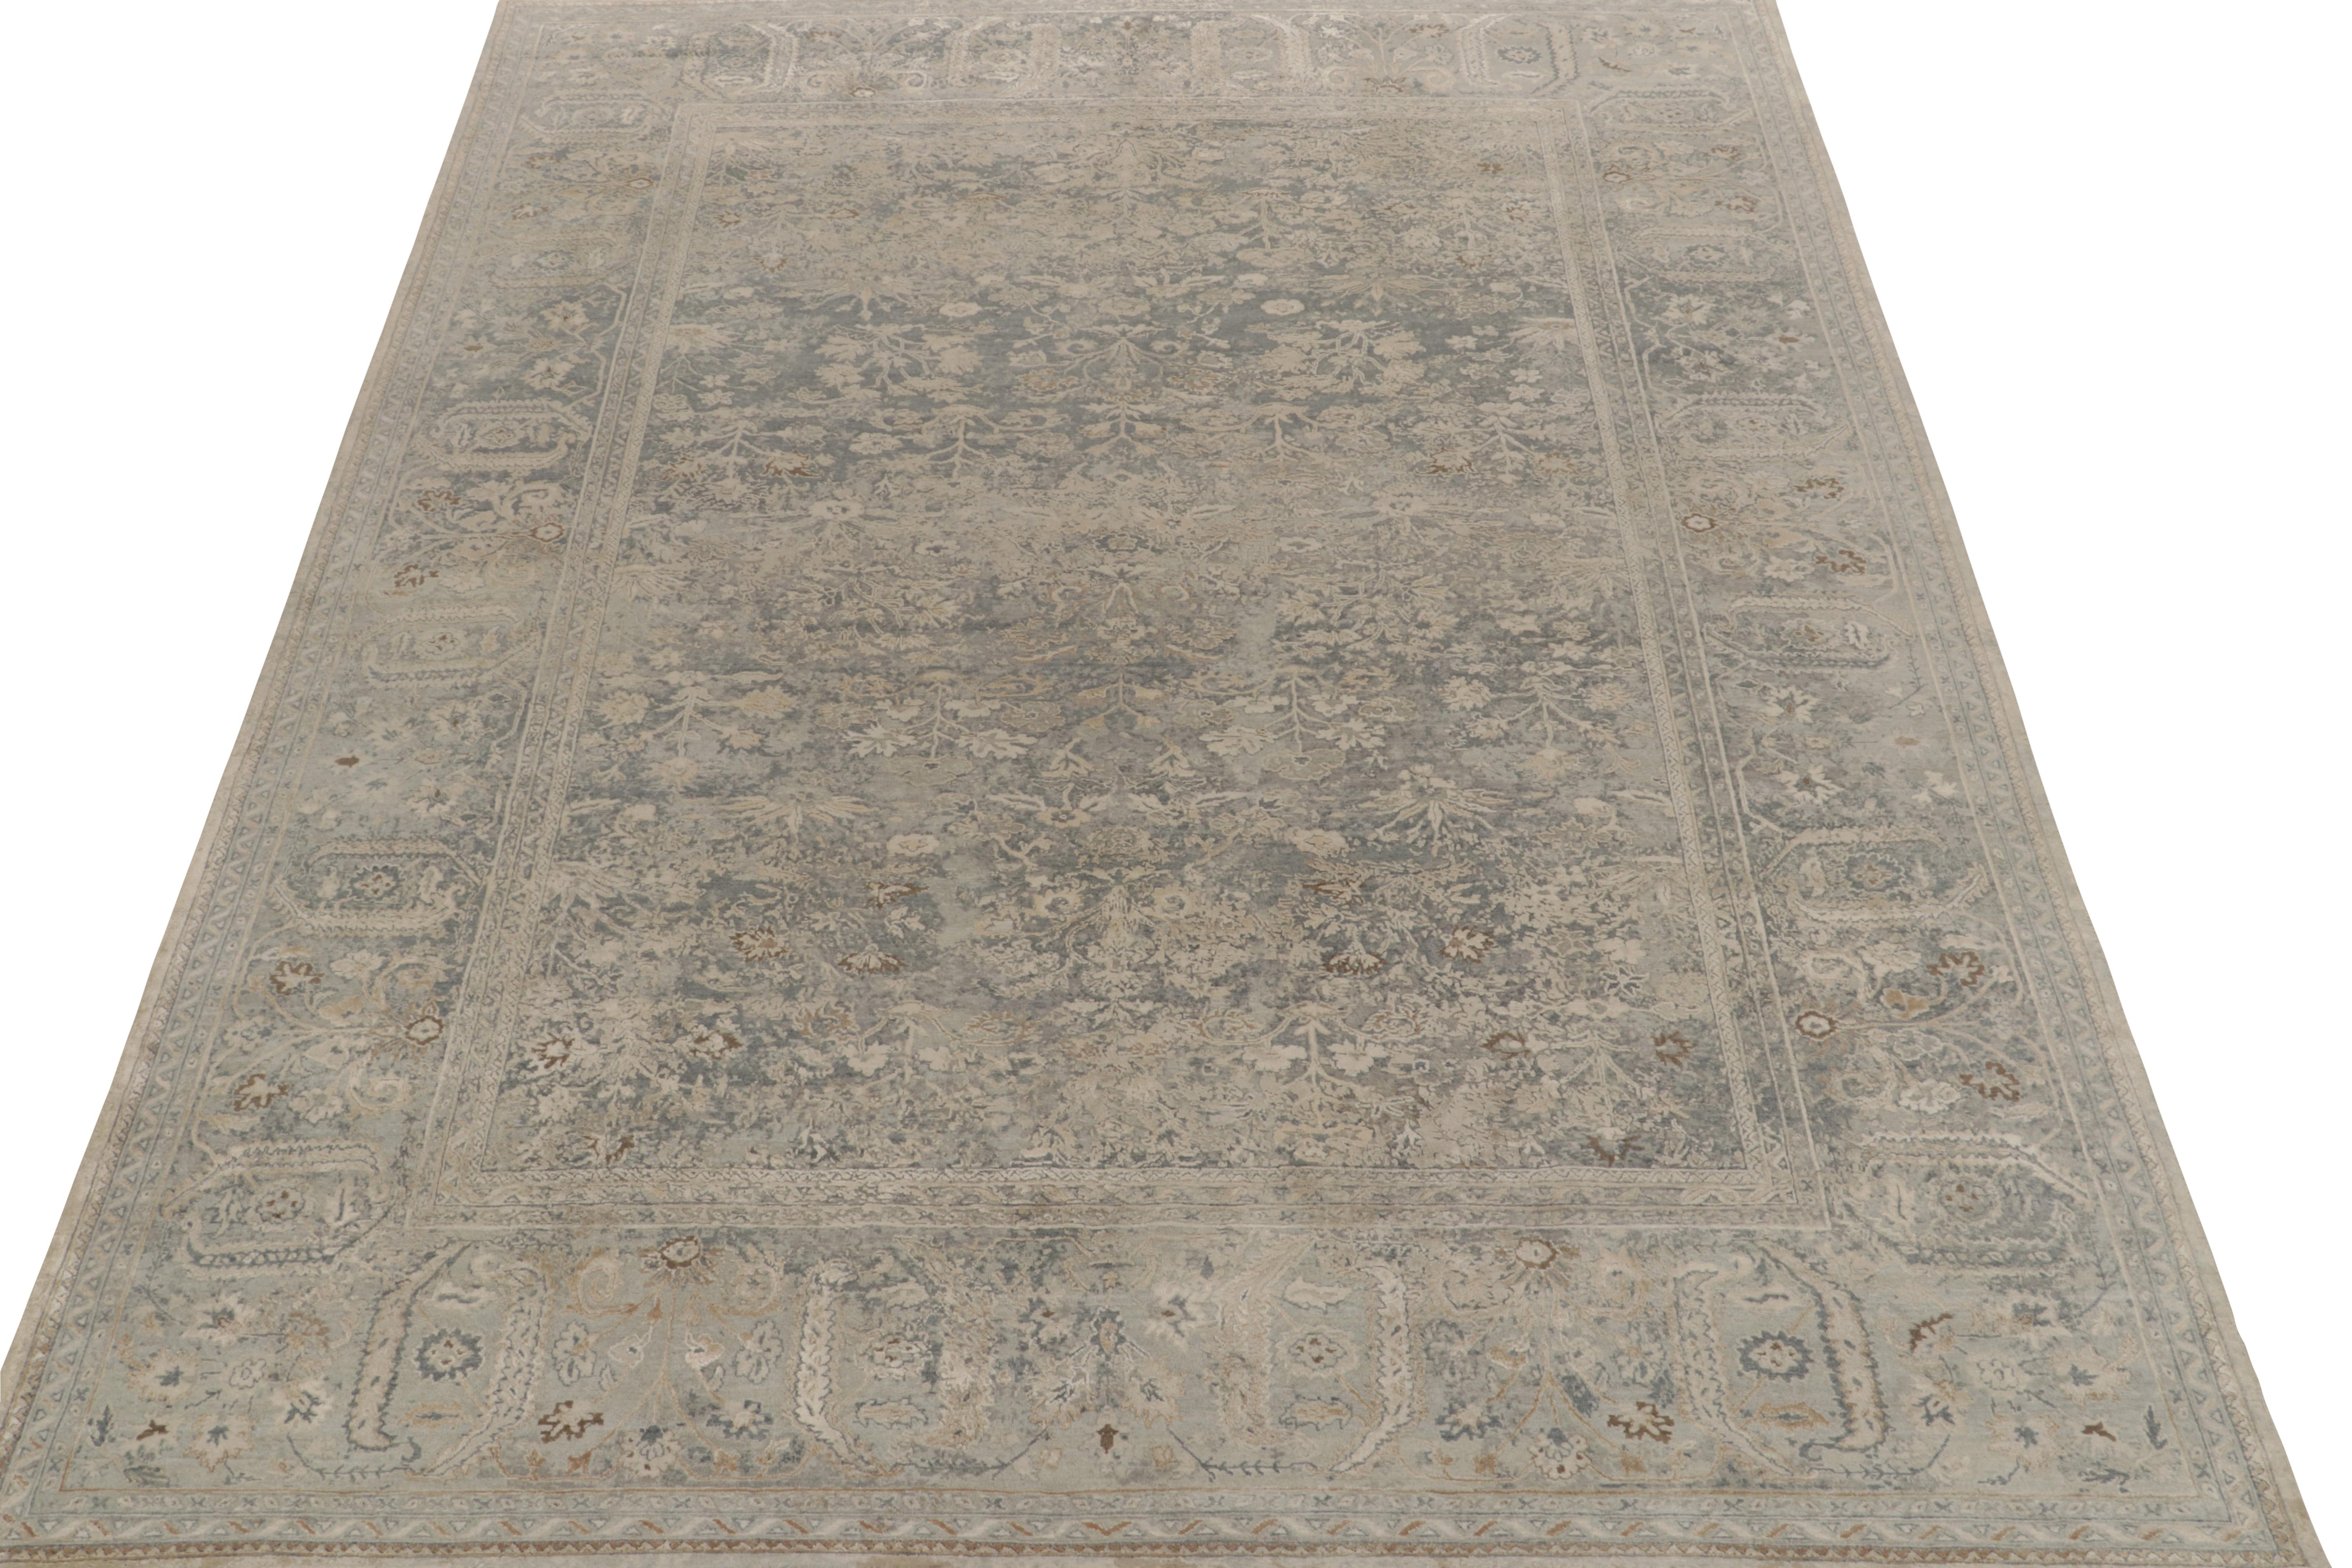 Indian Rug & Kilim’s Classic Style Rug in Silver-Gray, Blue & Beige Floral Pattern For Sale